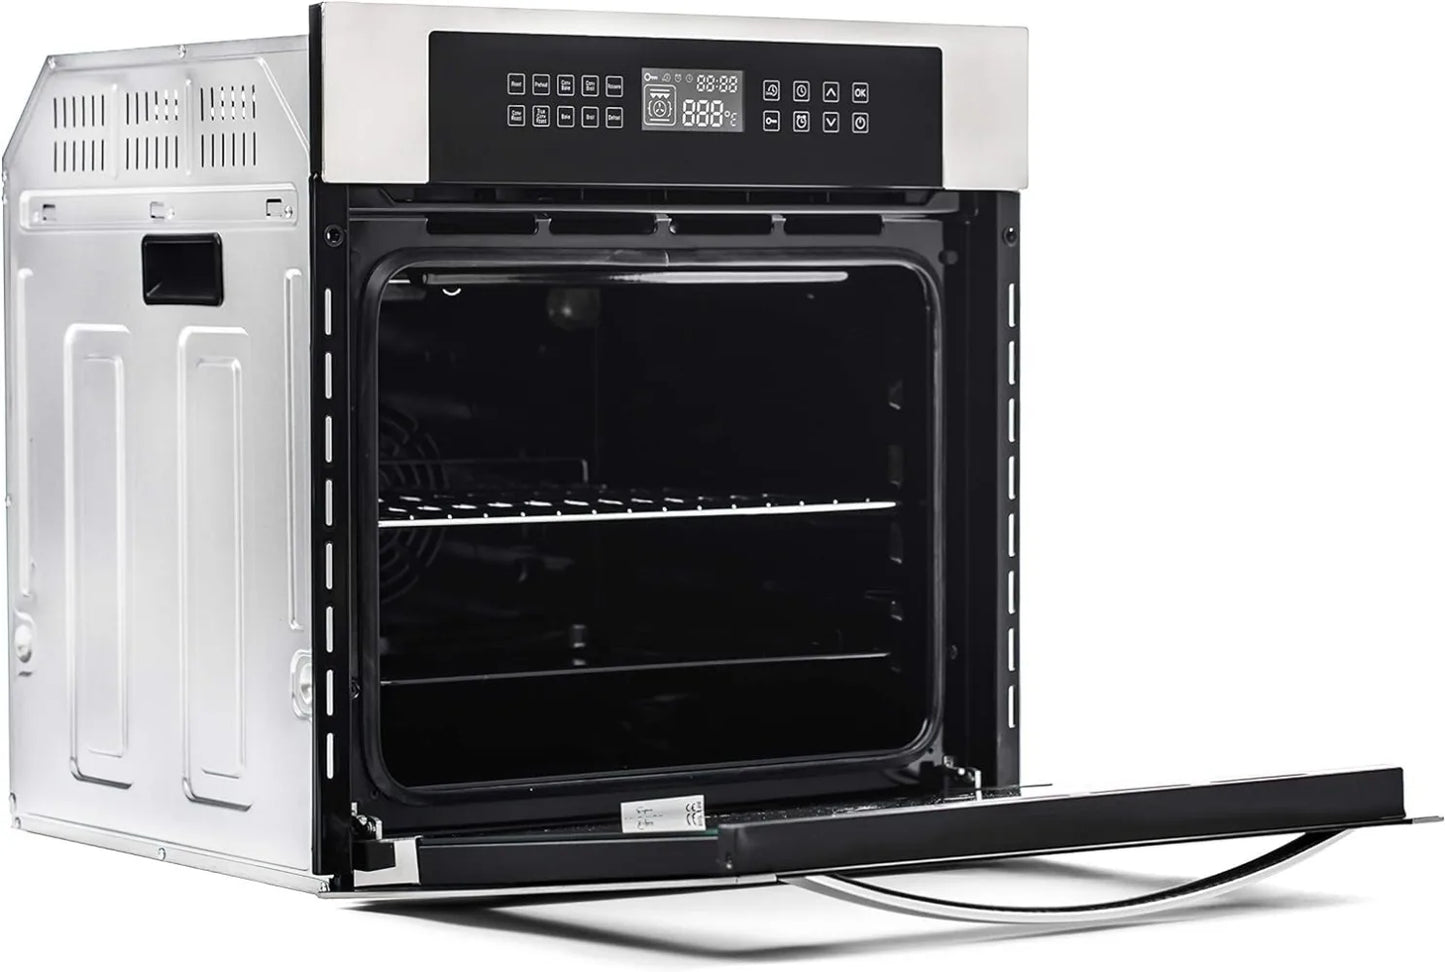 Empava 24" Electric Convection Single Wall Oven 10 Cooking Functions Deluxe 360° ROTISSERIE